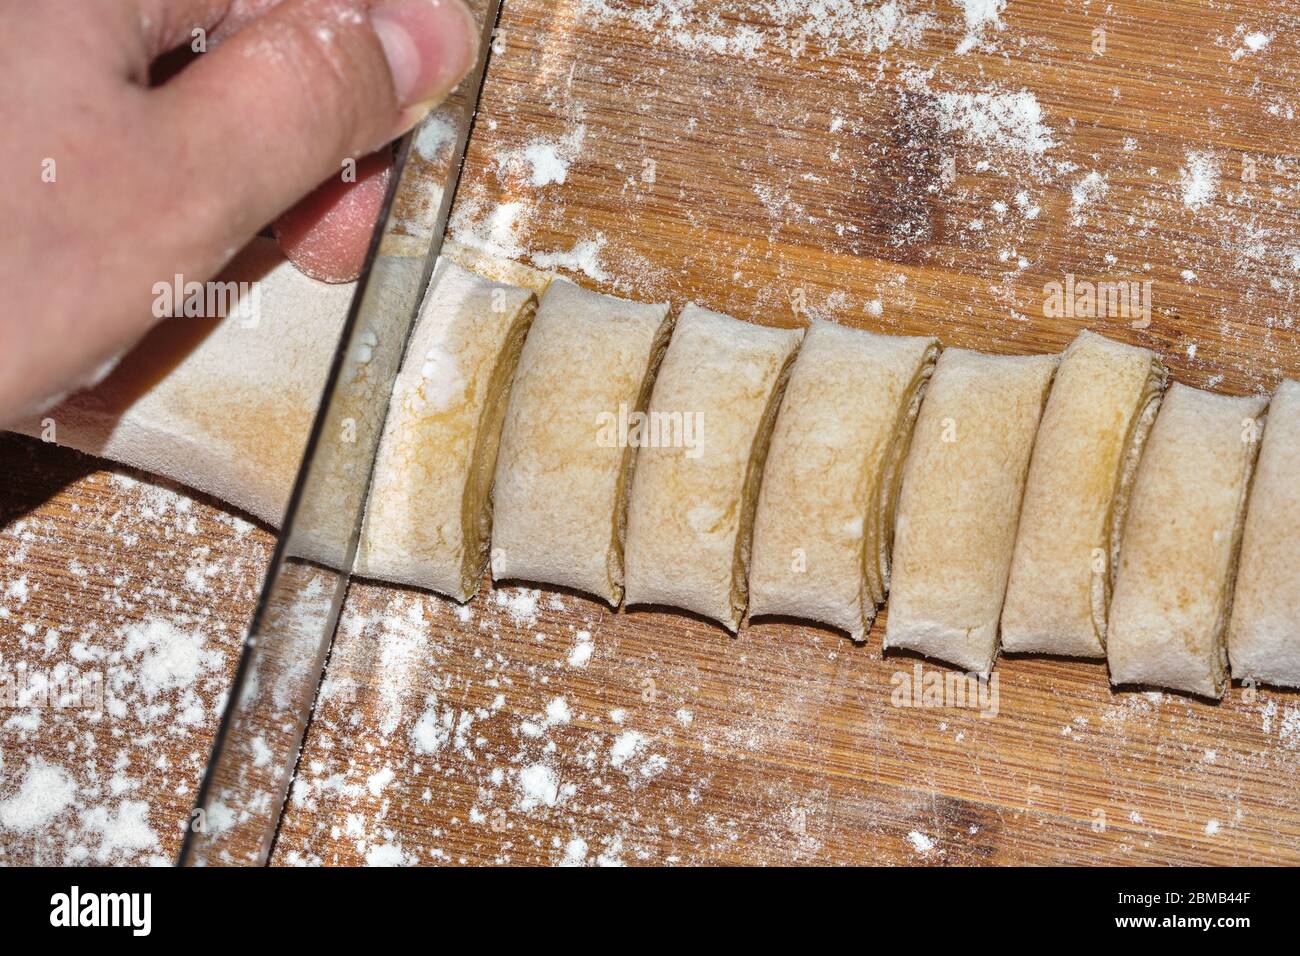 Raw Italian homemade tagliatelle pasta, made with eggs and flour Stock Photo